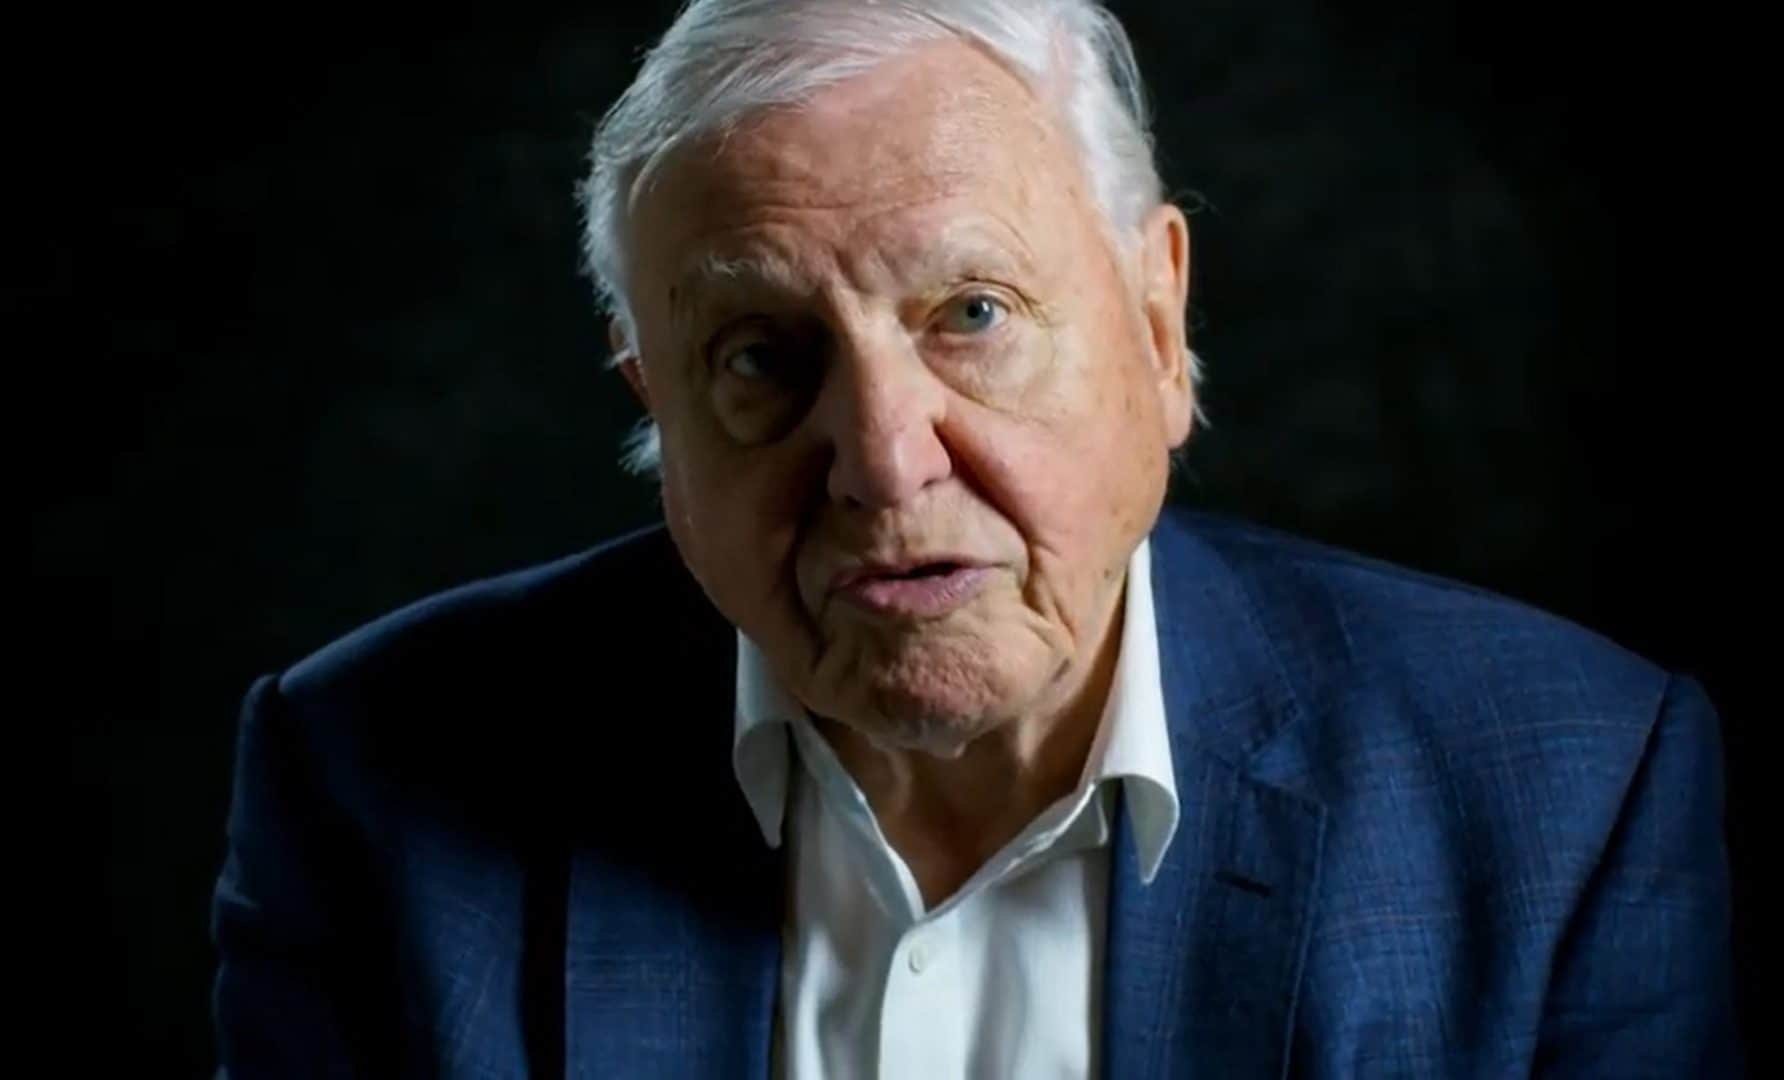 Climate change moment of crisis has come, warns Sir David Attenborough